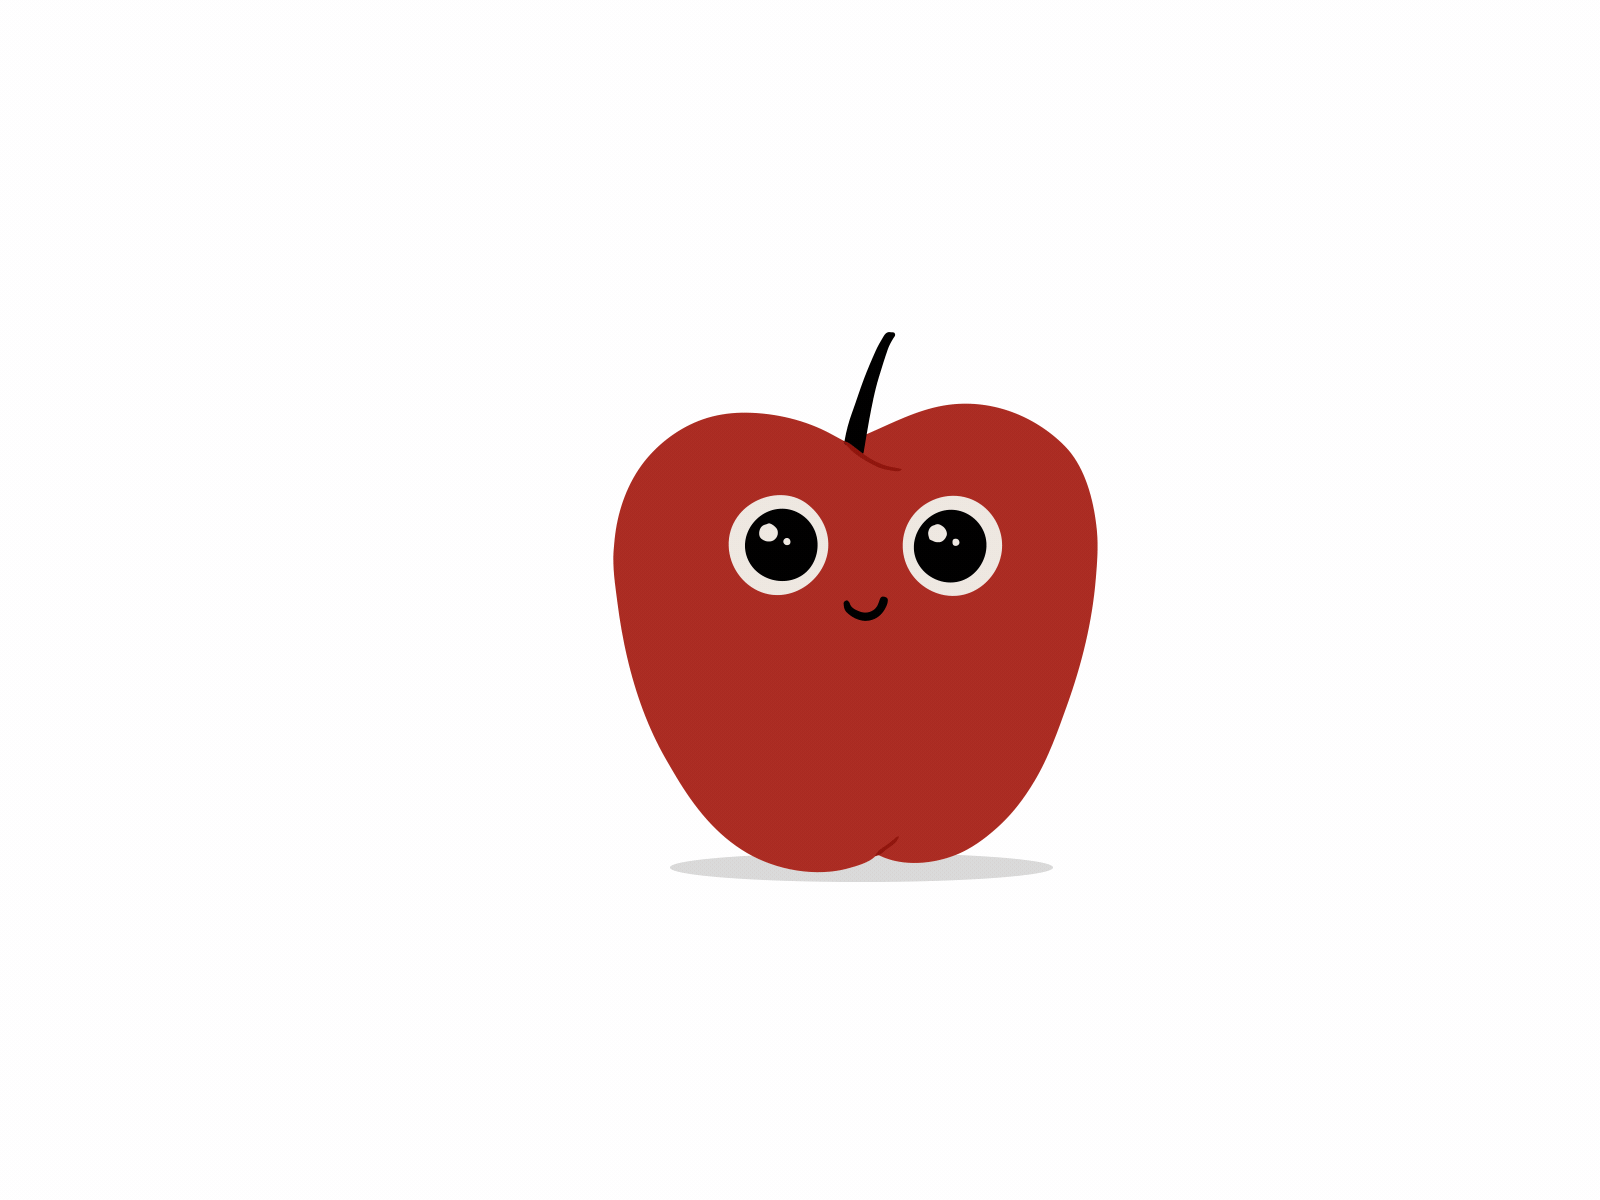 Death of an apple by Marianna Che on Dribbble